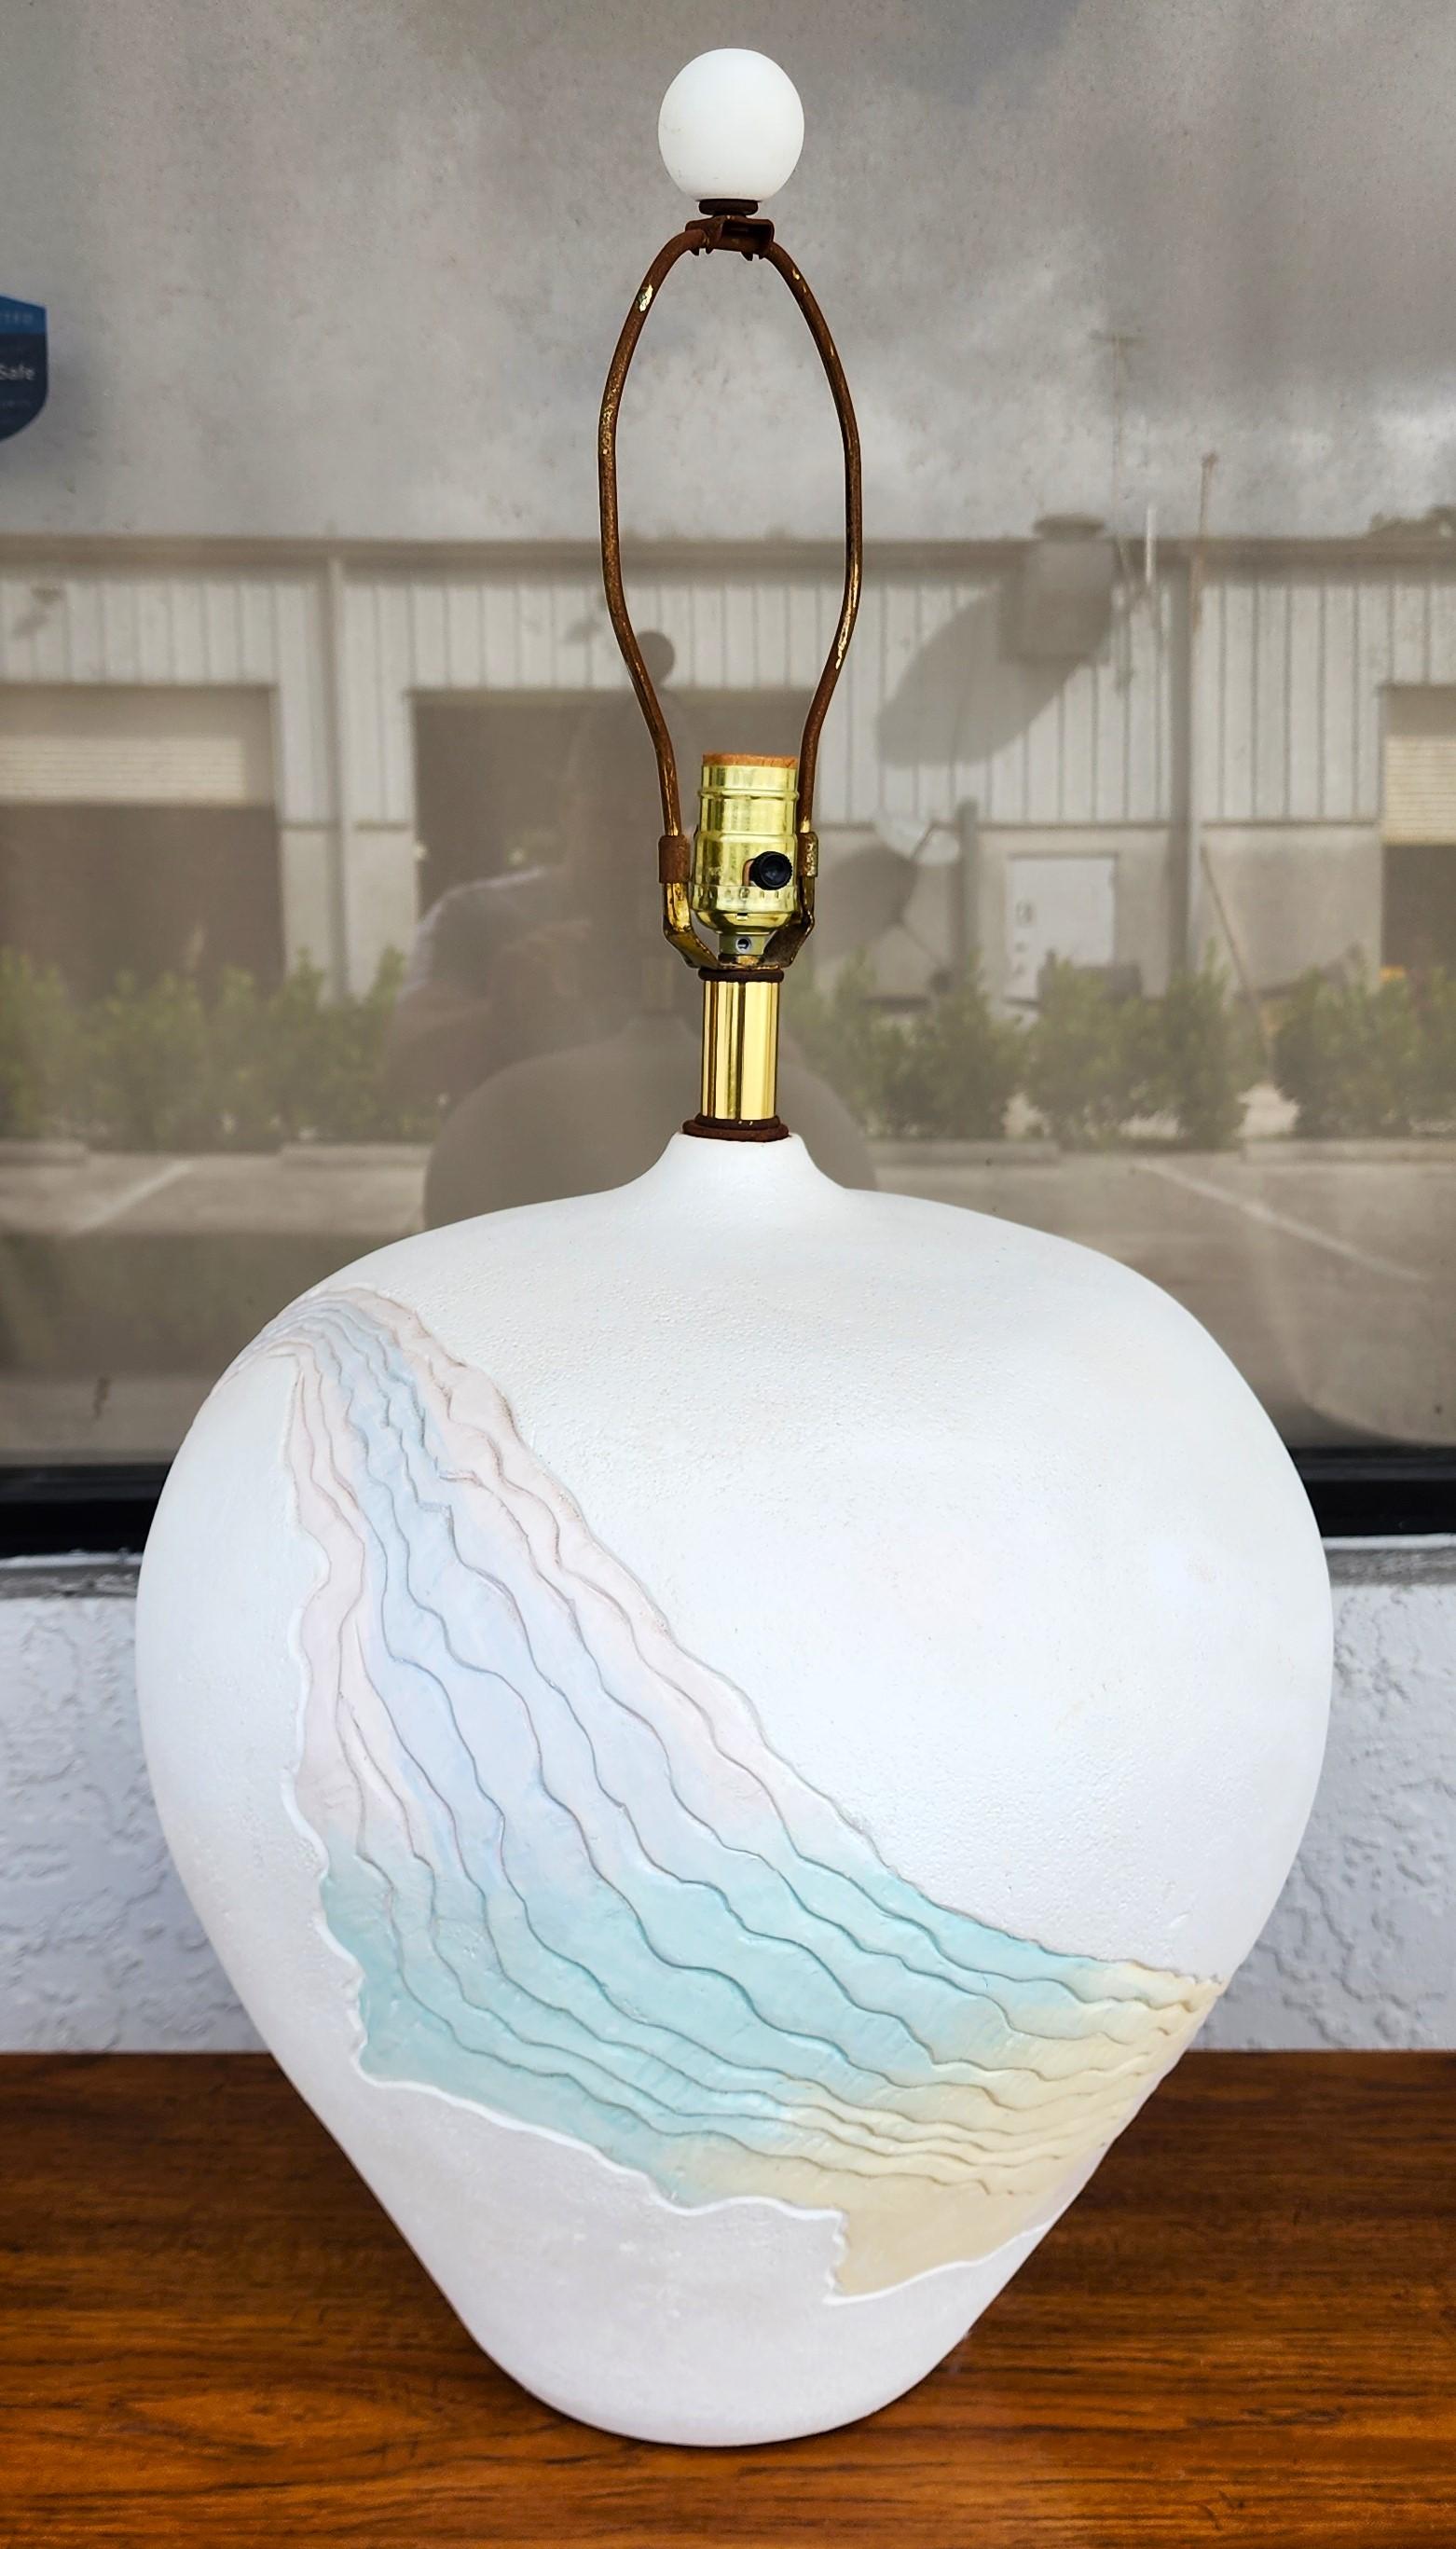 For FULL item description click on CONTINUE READING at the bottom of this page.

Offering One Of Our Recent Palm Beach Estate Fine Lighting Acquisitions Of A
1970's Southwestern Style Plaster Table Lamp Signed LEE REYNOLDS

We have many other